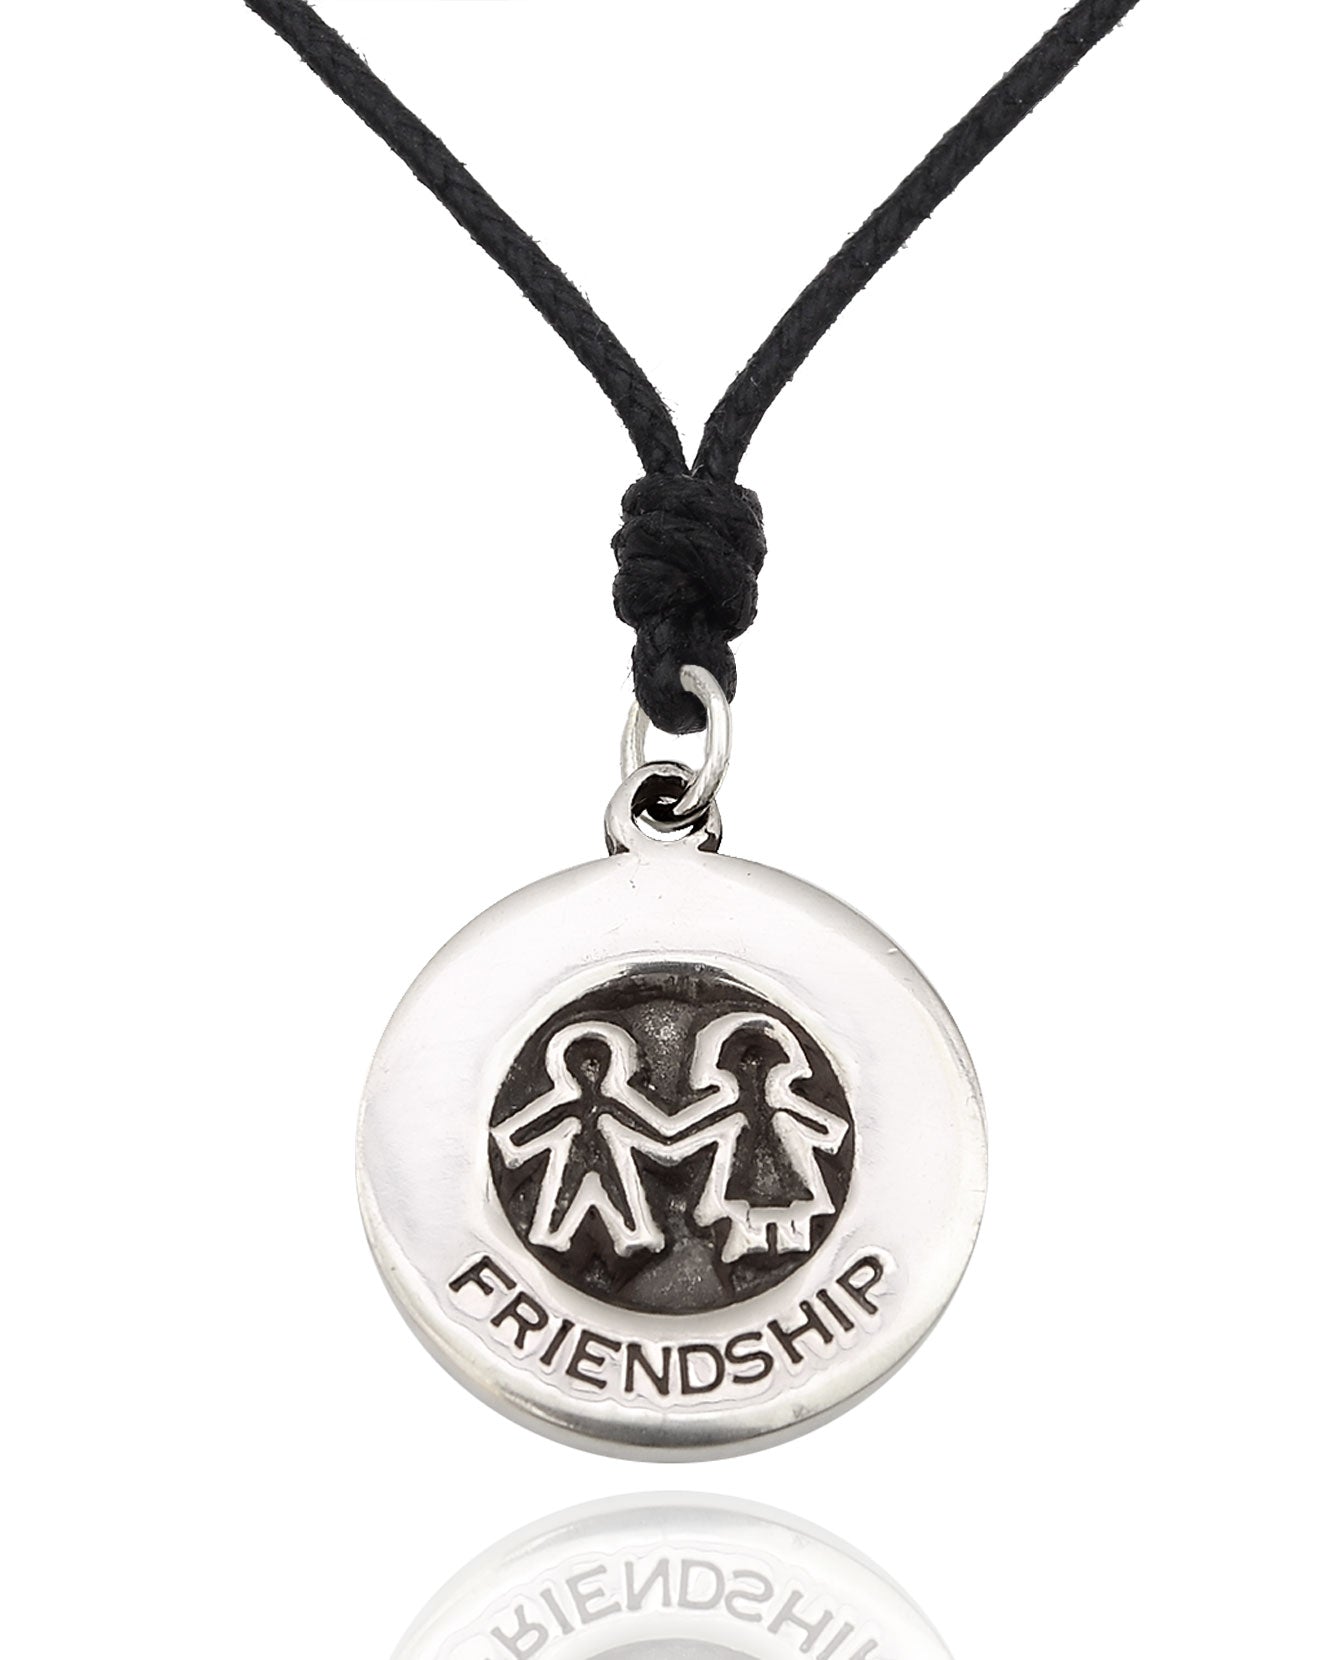 Friendship Best Friends Silver Pewter Charm Necklace Pendant Jewelry